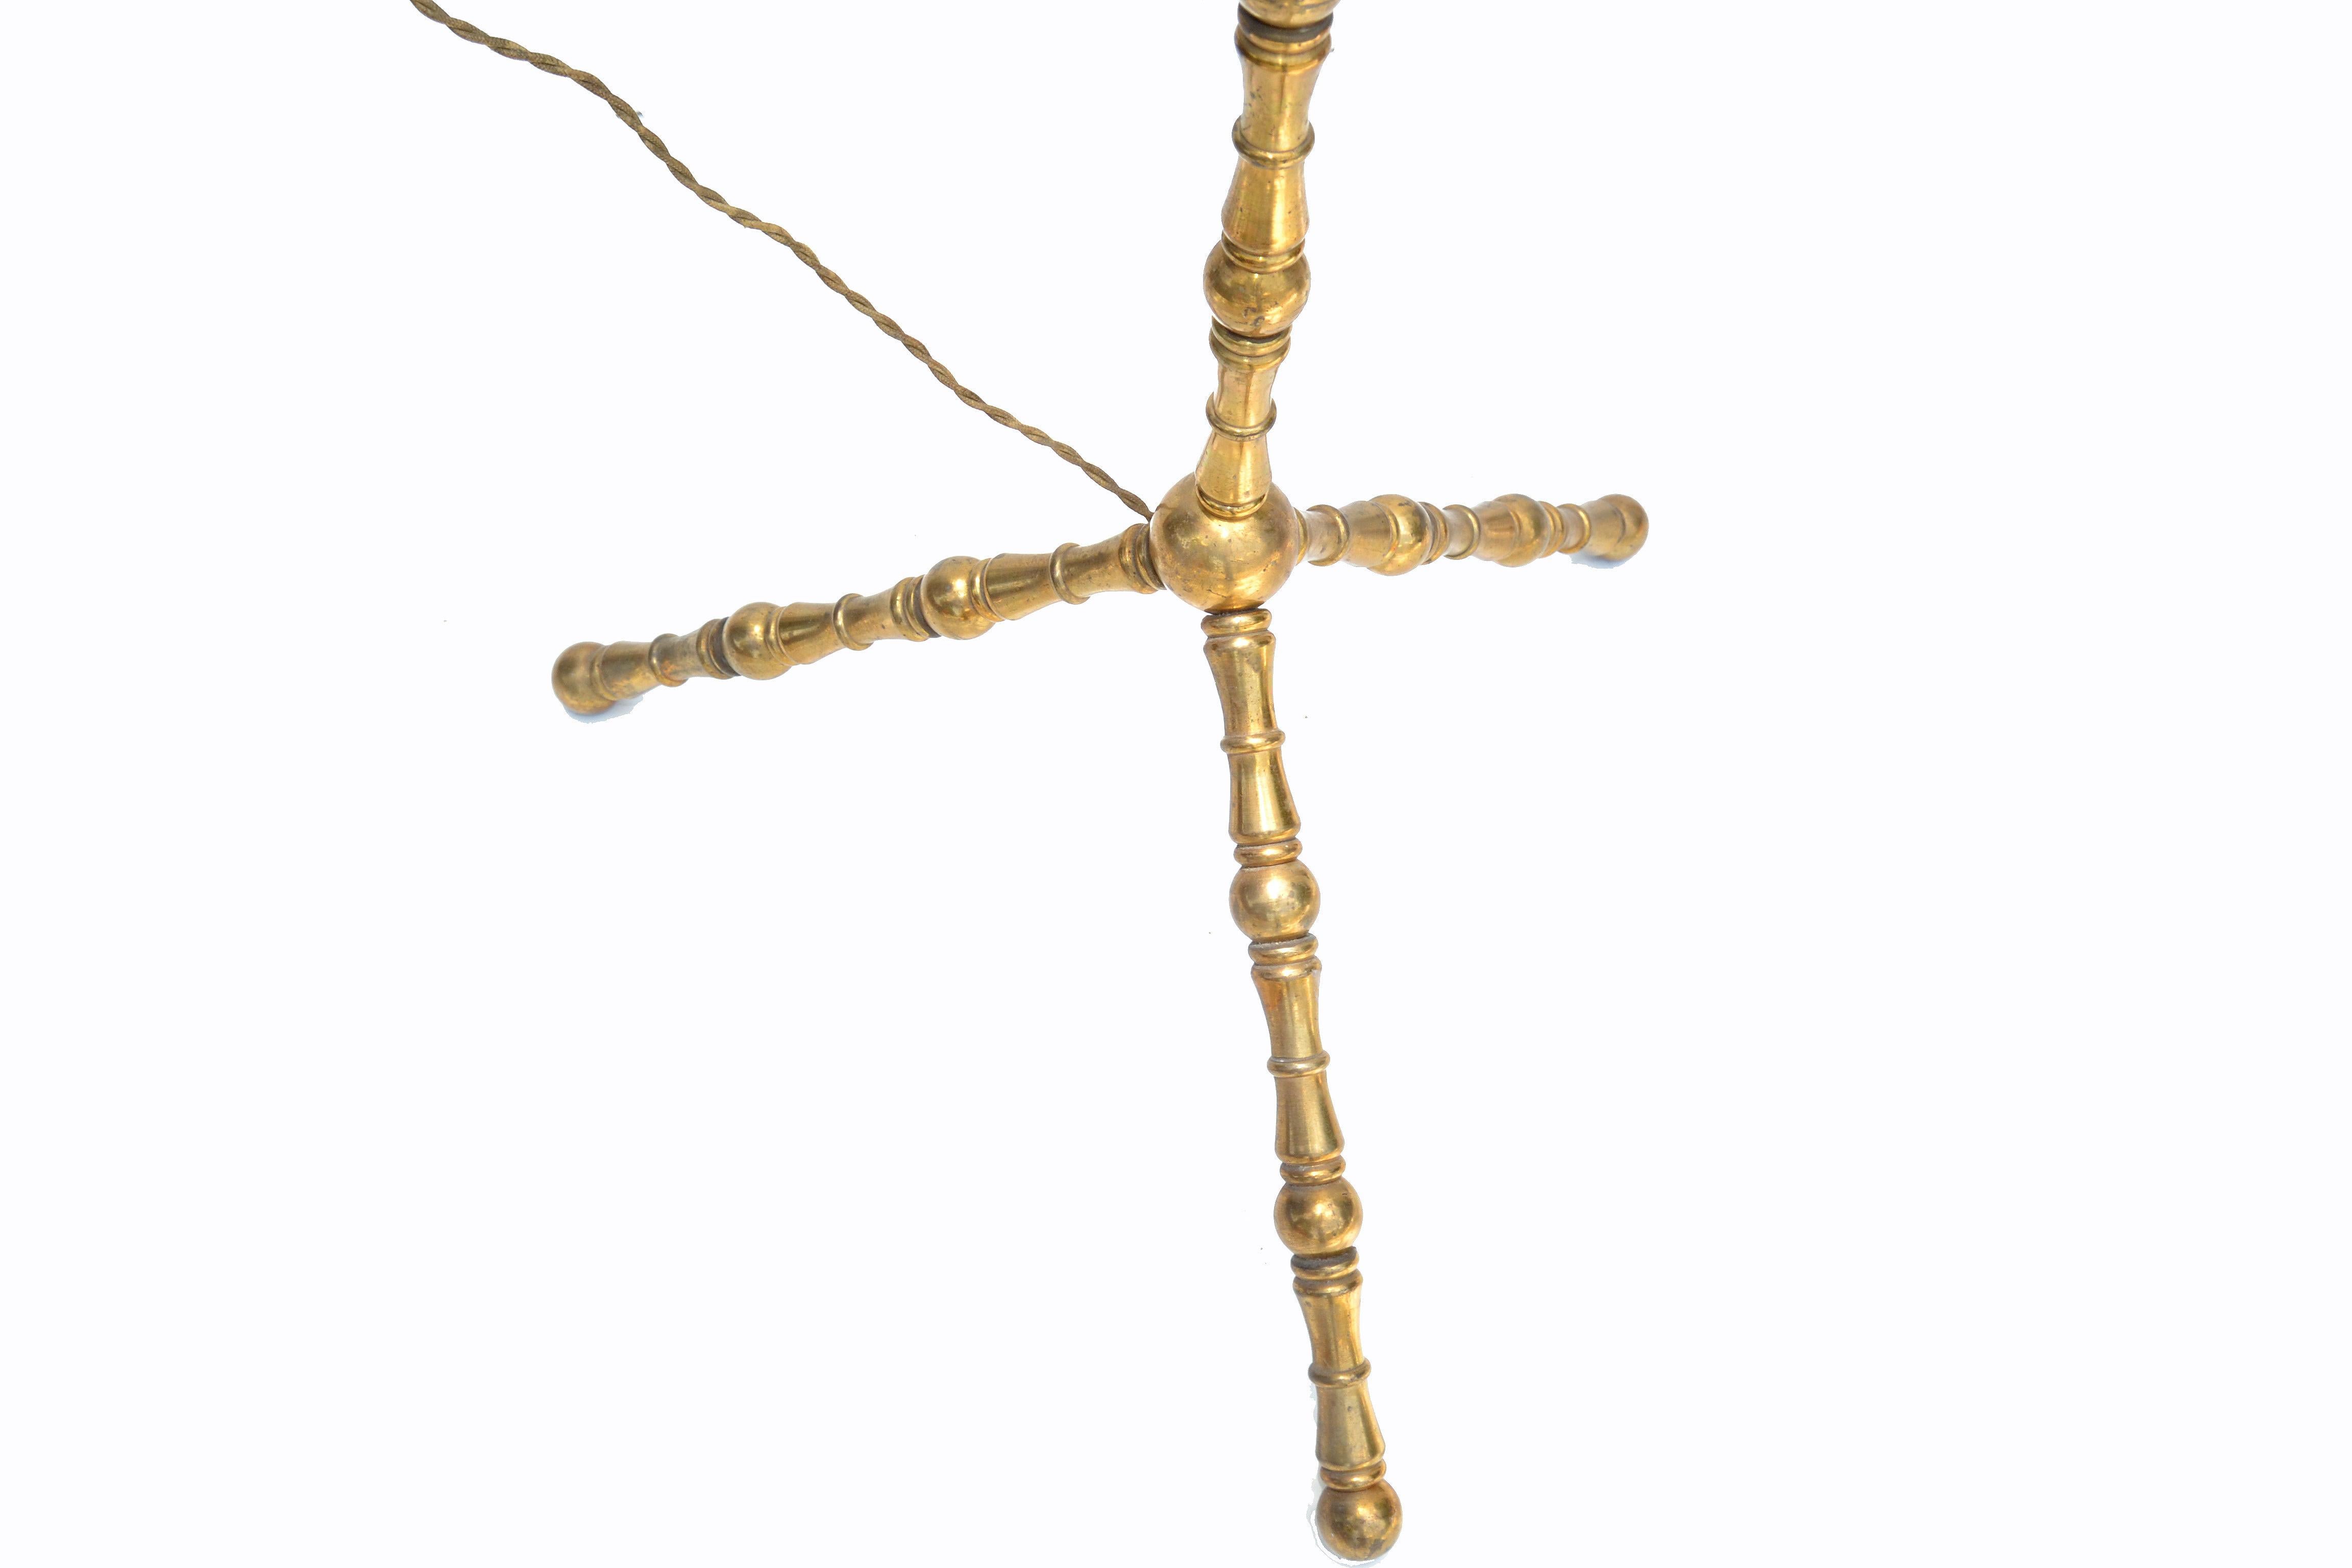 French Neoclassical Bronze and Brass Maison Baguès Floor Lamp, 1950 For Sale 1